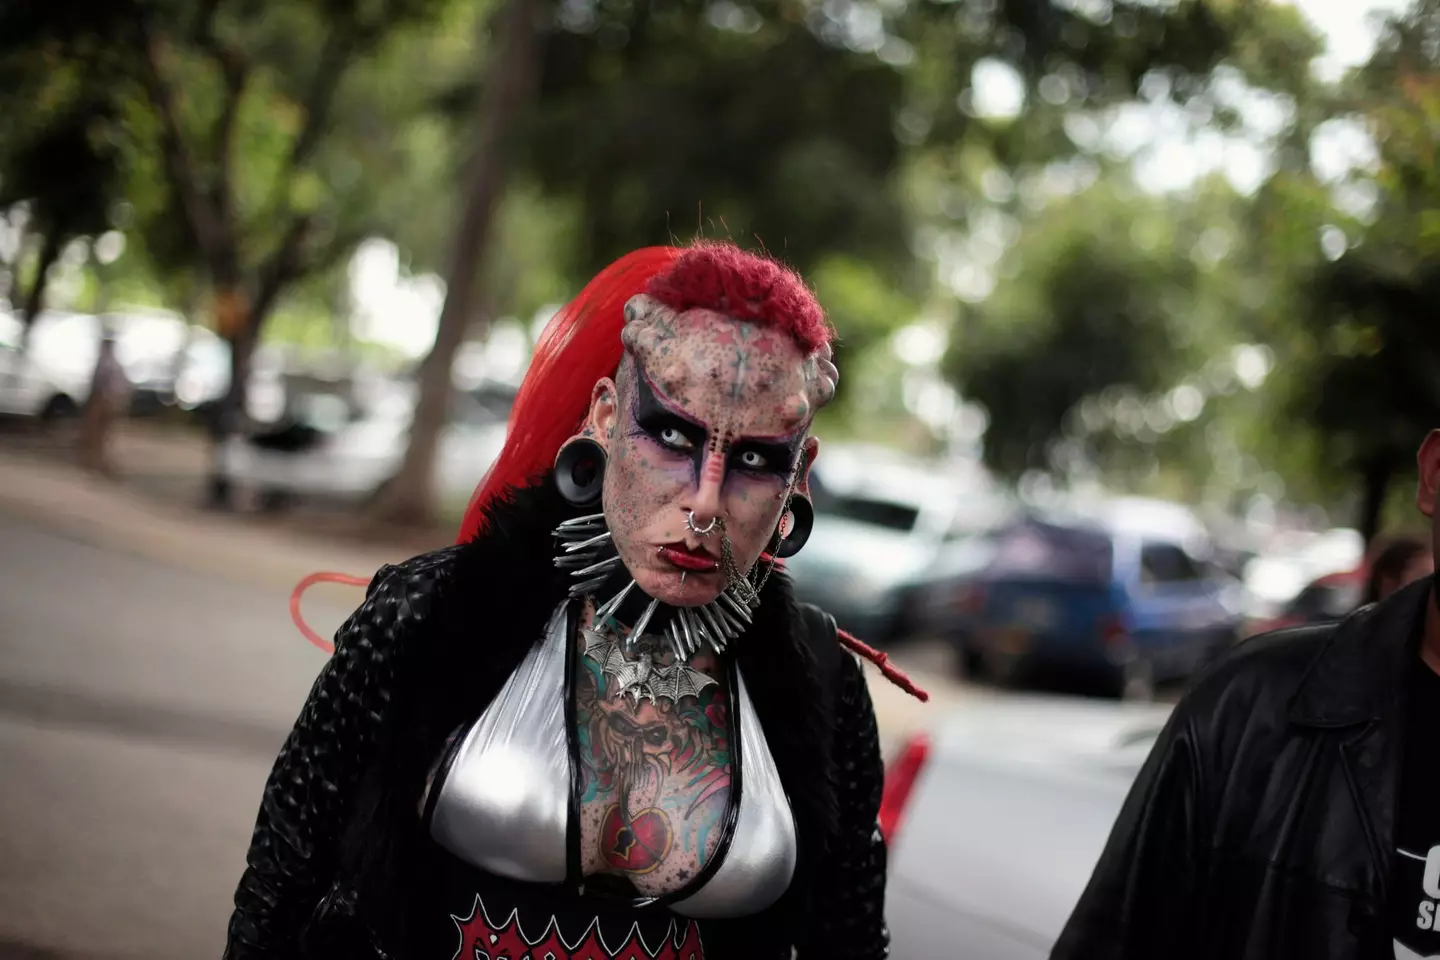 Maria Jose Cristerna is recognised by the Guinness World Records as the most tattooed woman in the world.